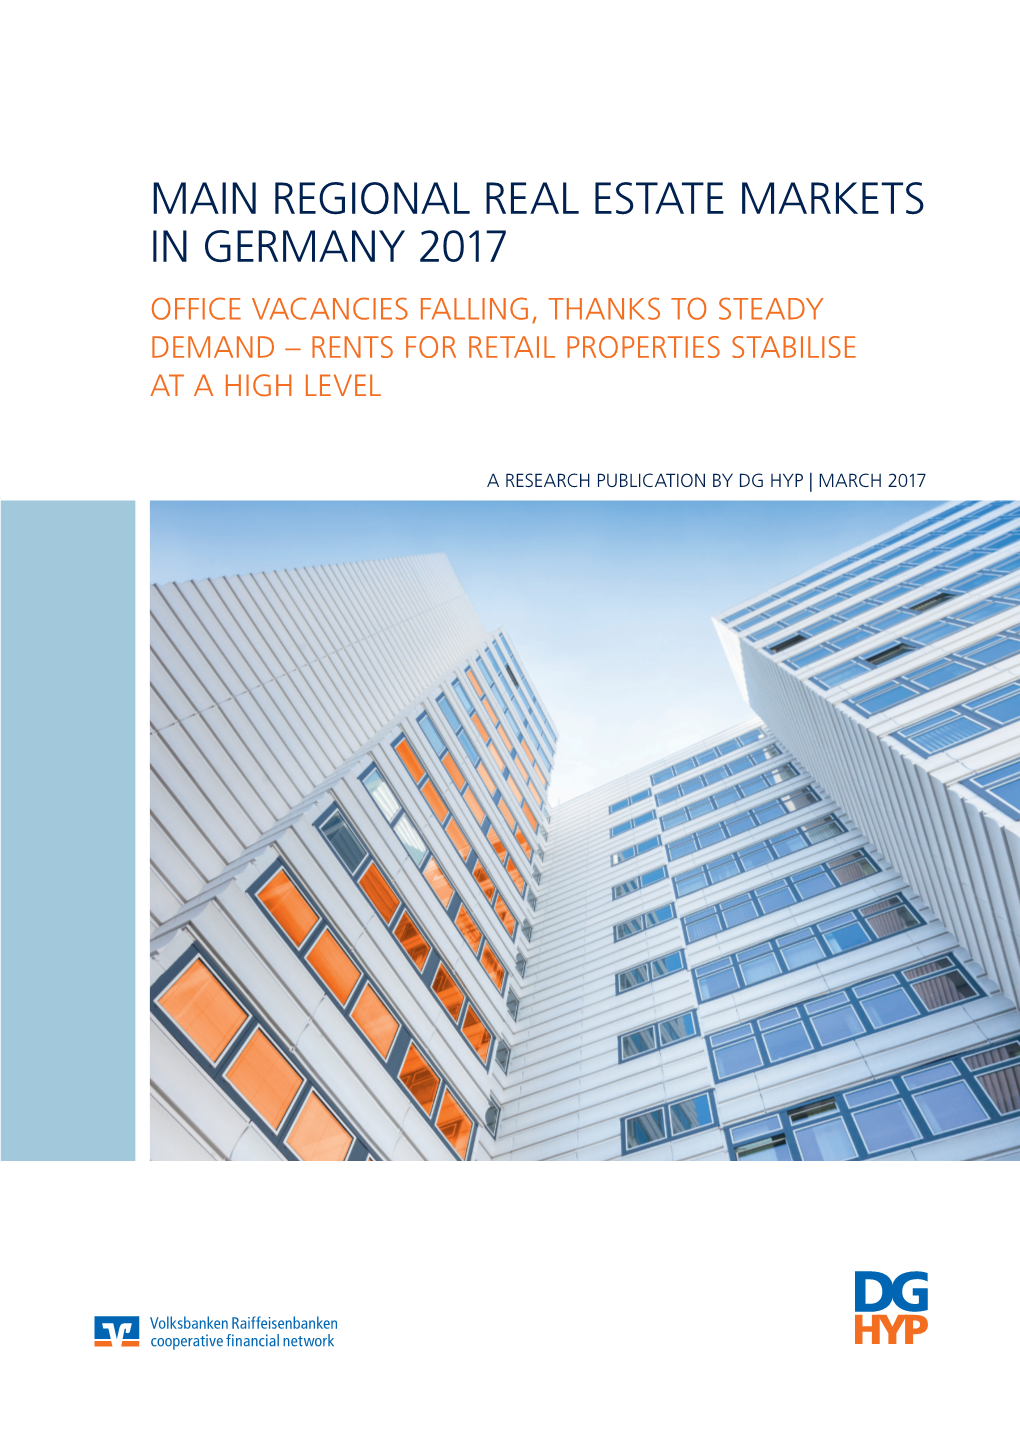 Regional Real Estate Markets in Germany 2017 Office Vacancies Falling, Thanks to Steady Demand – Rents for Retail Properties Stabilise at a High Level